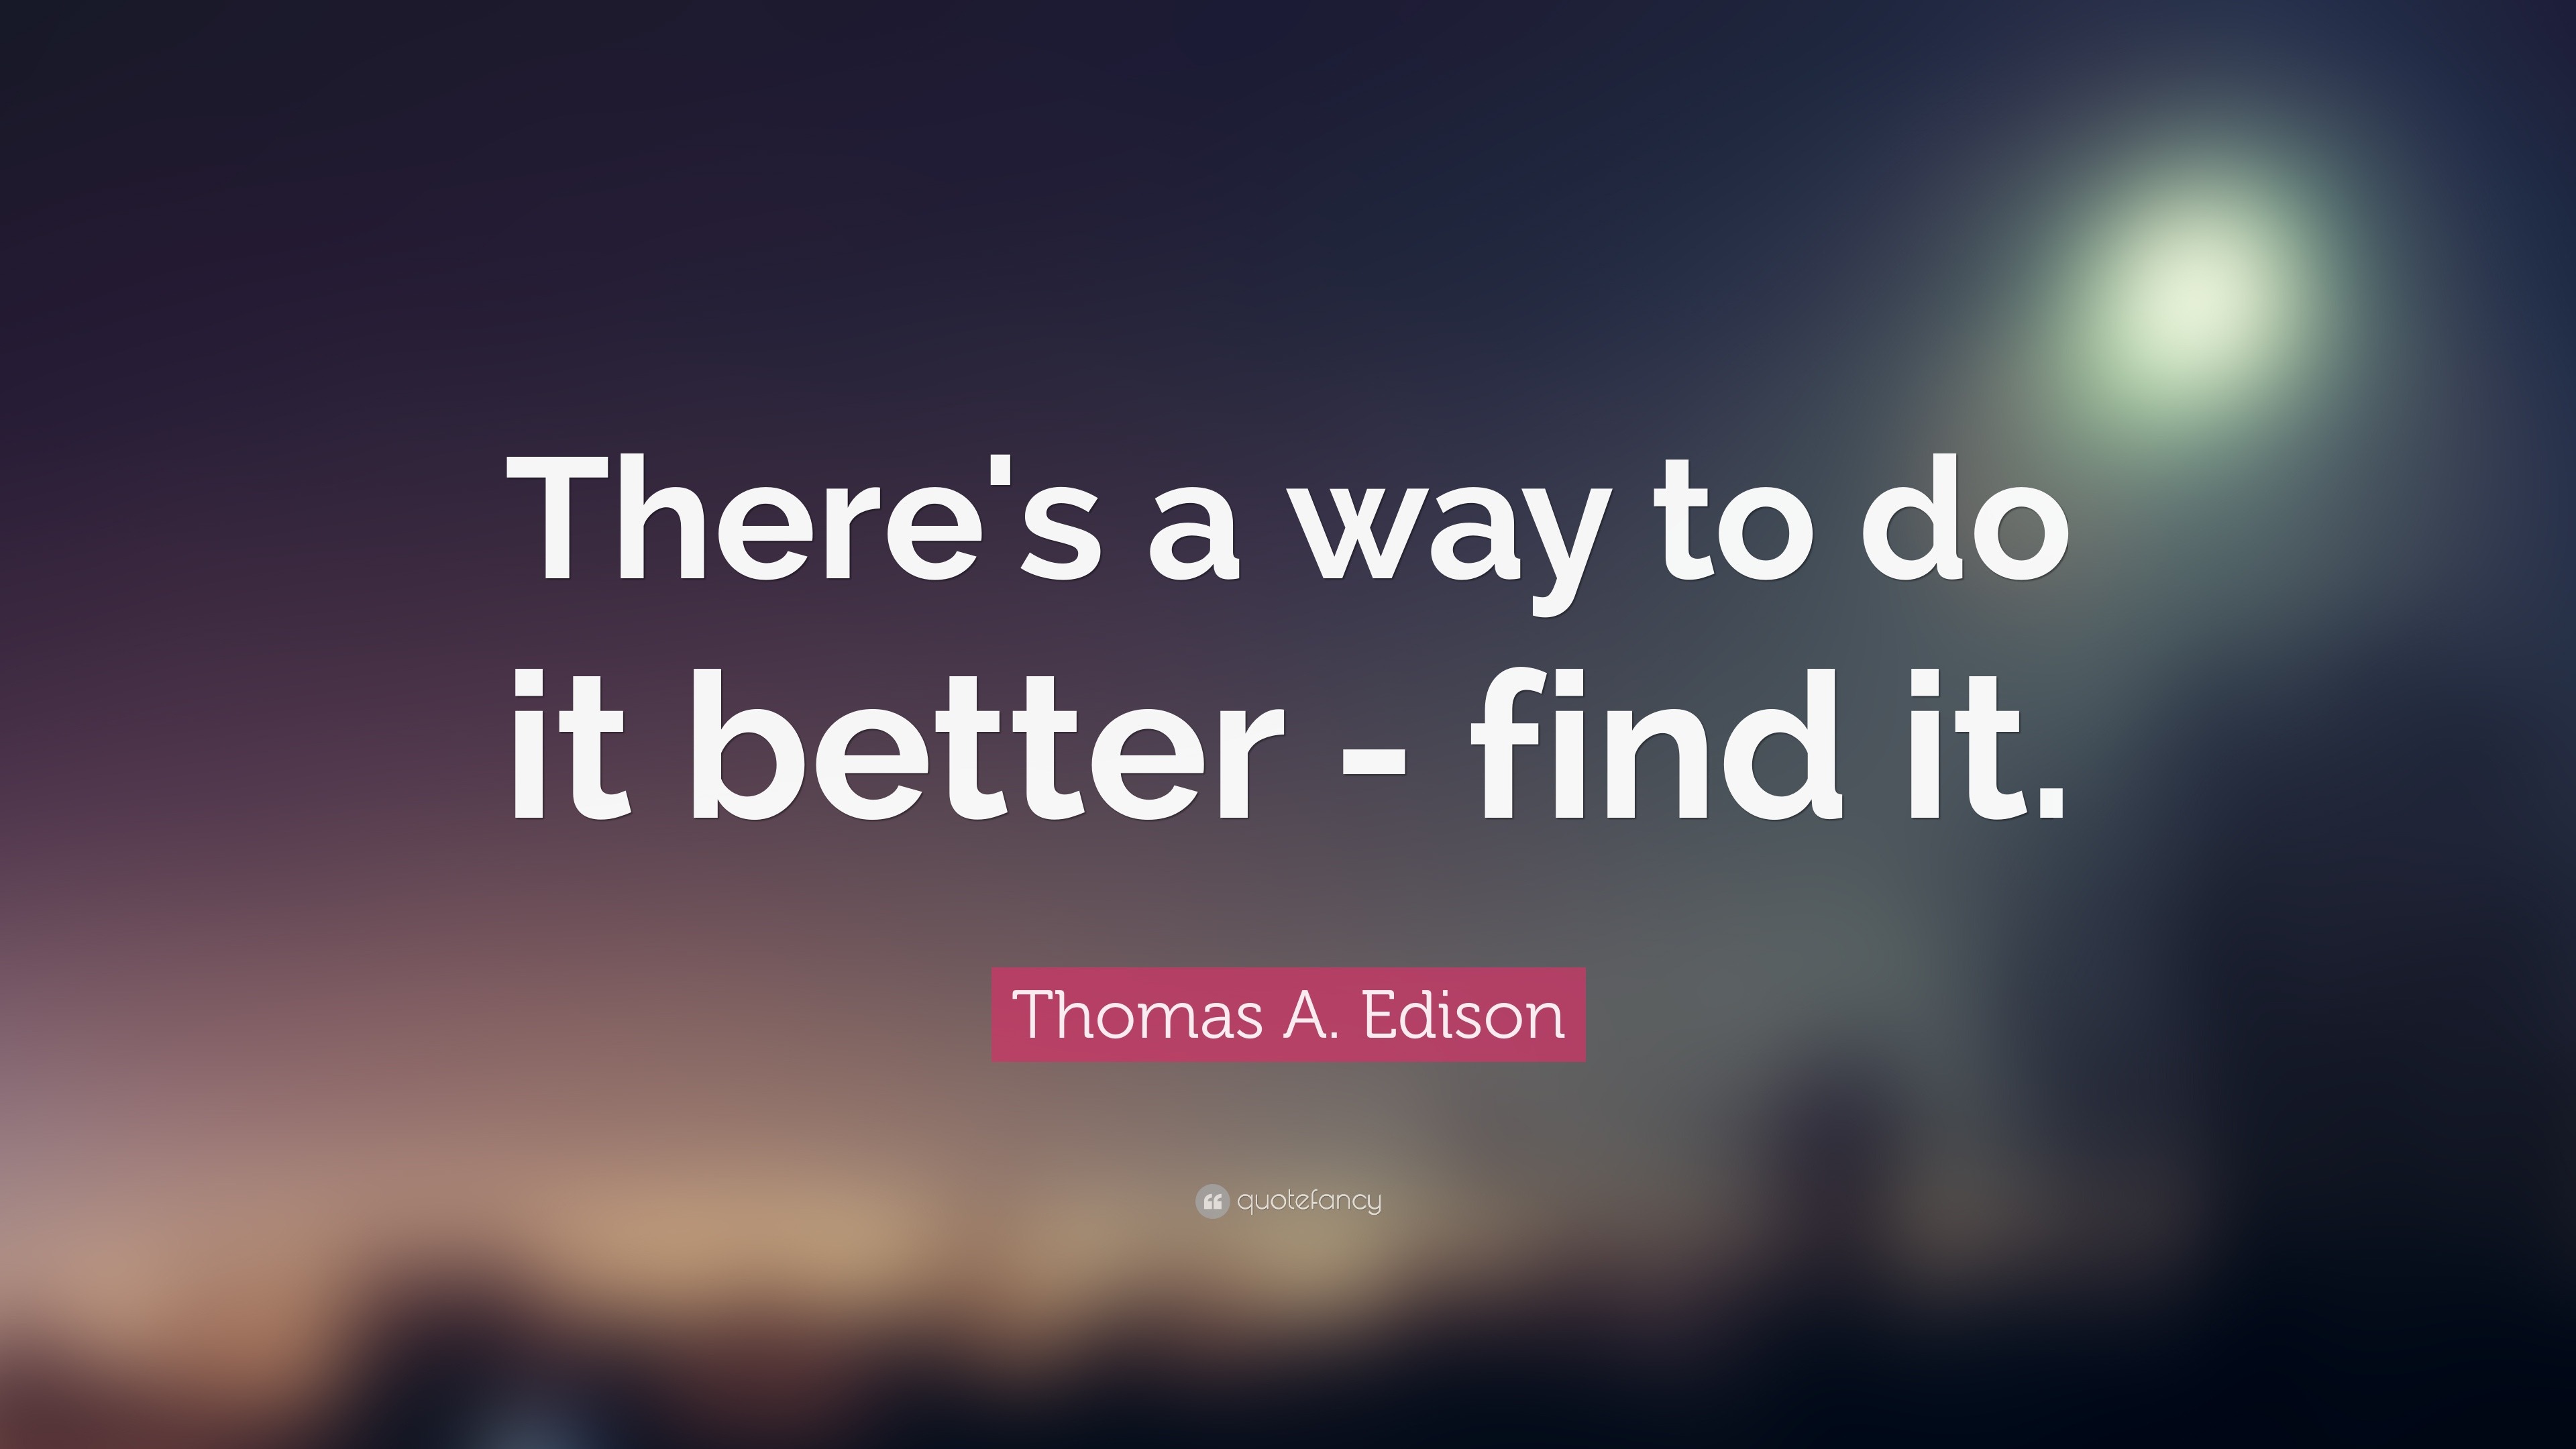 Thomas A. Edison Quote: "There's a way to do it better ...